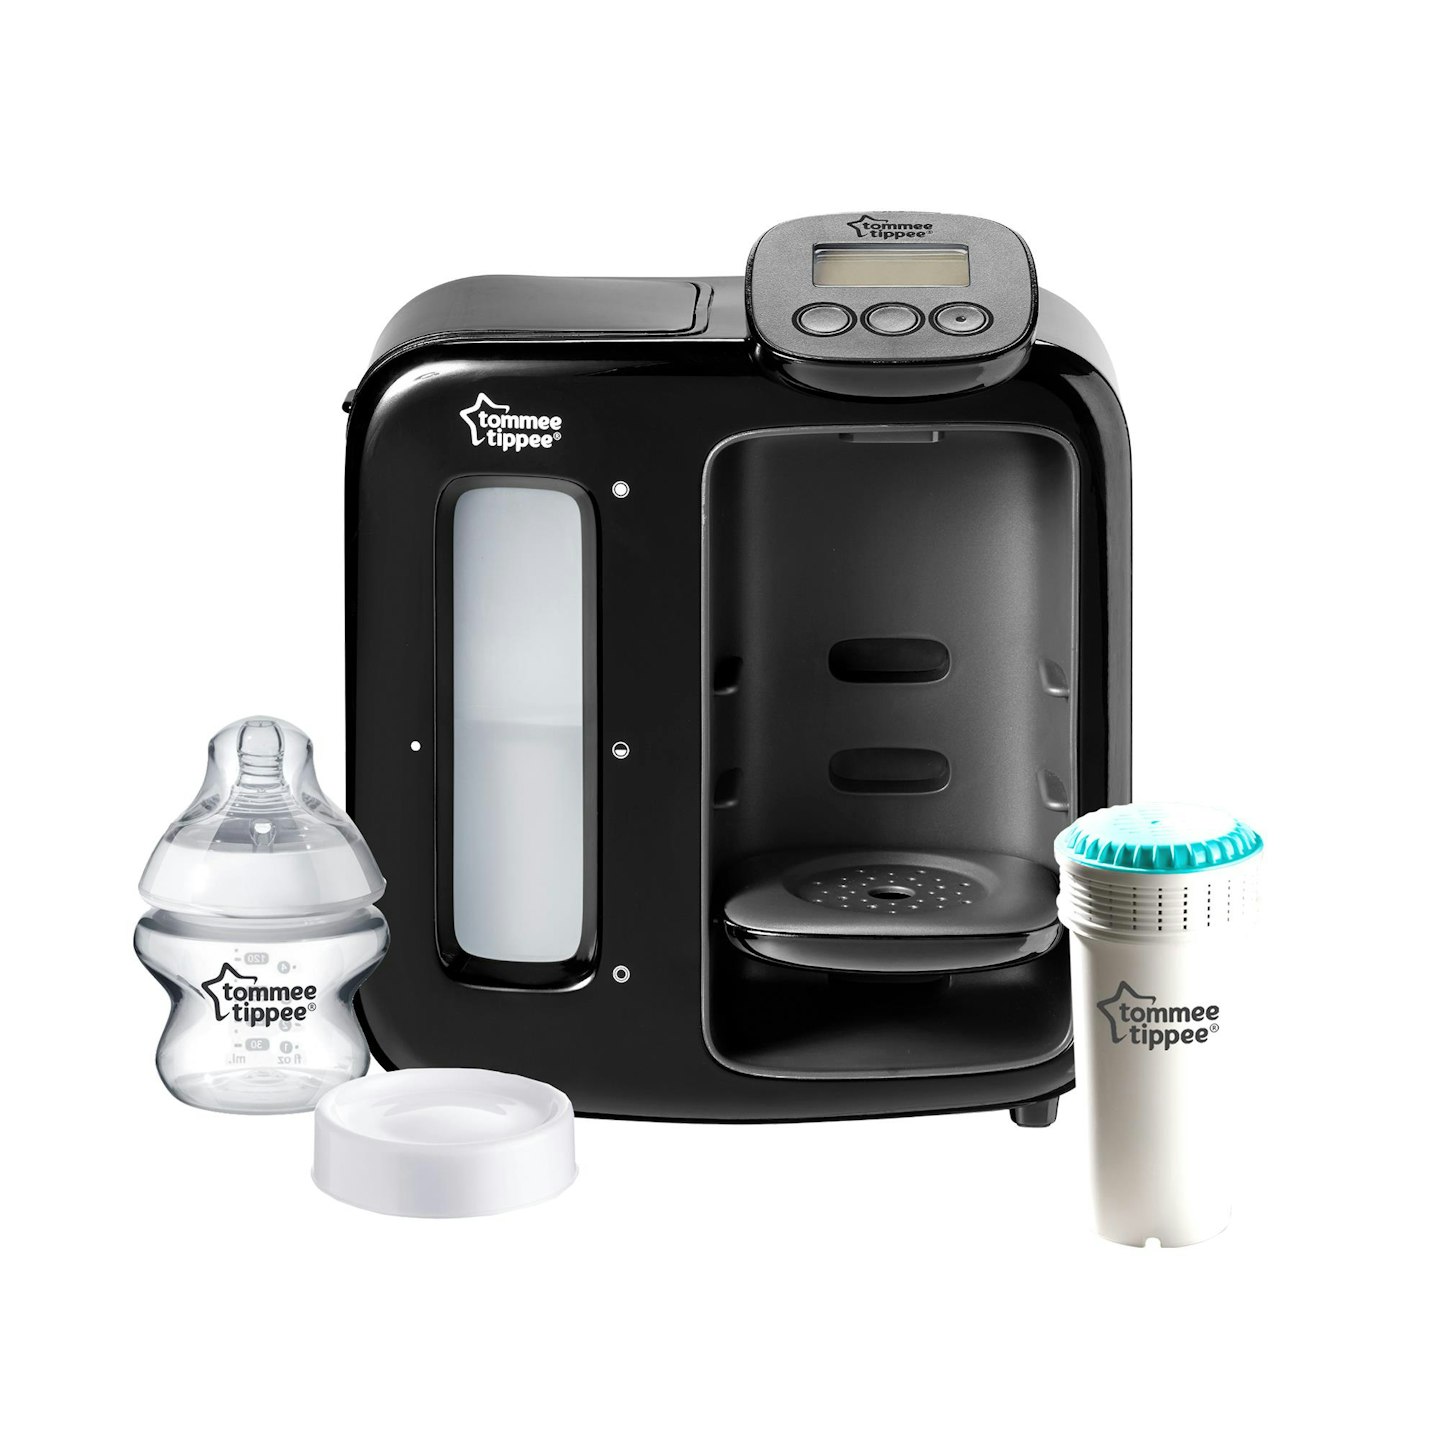 Tommee Tippee Perfect Prep Day & Night review